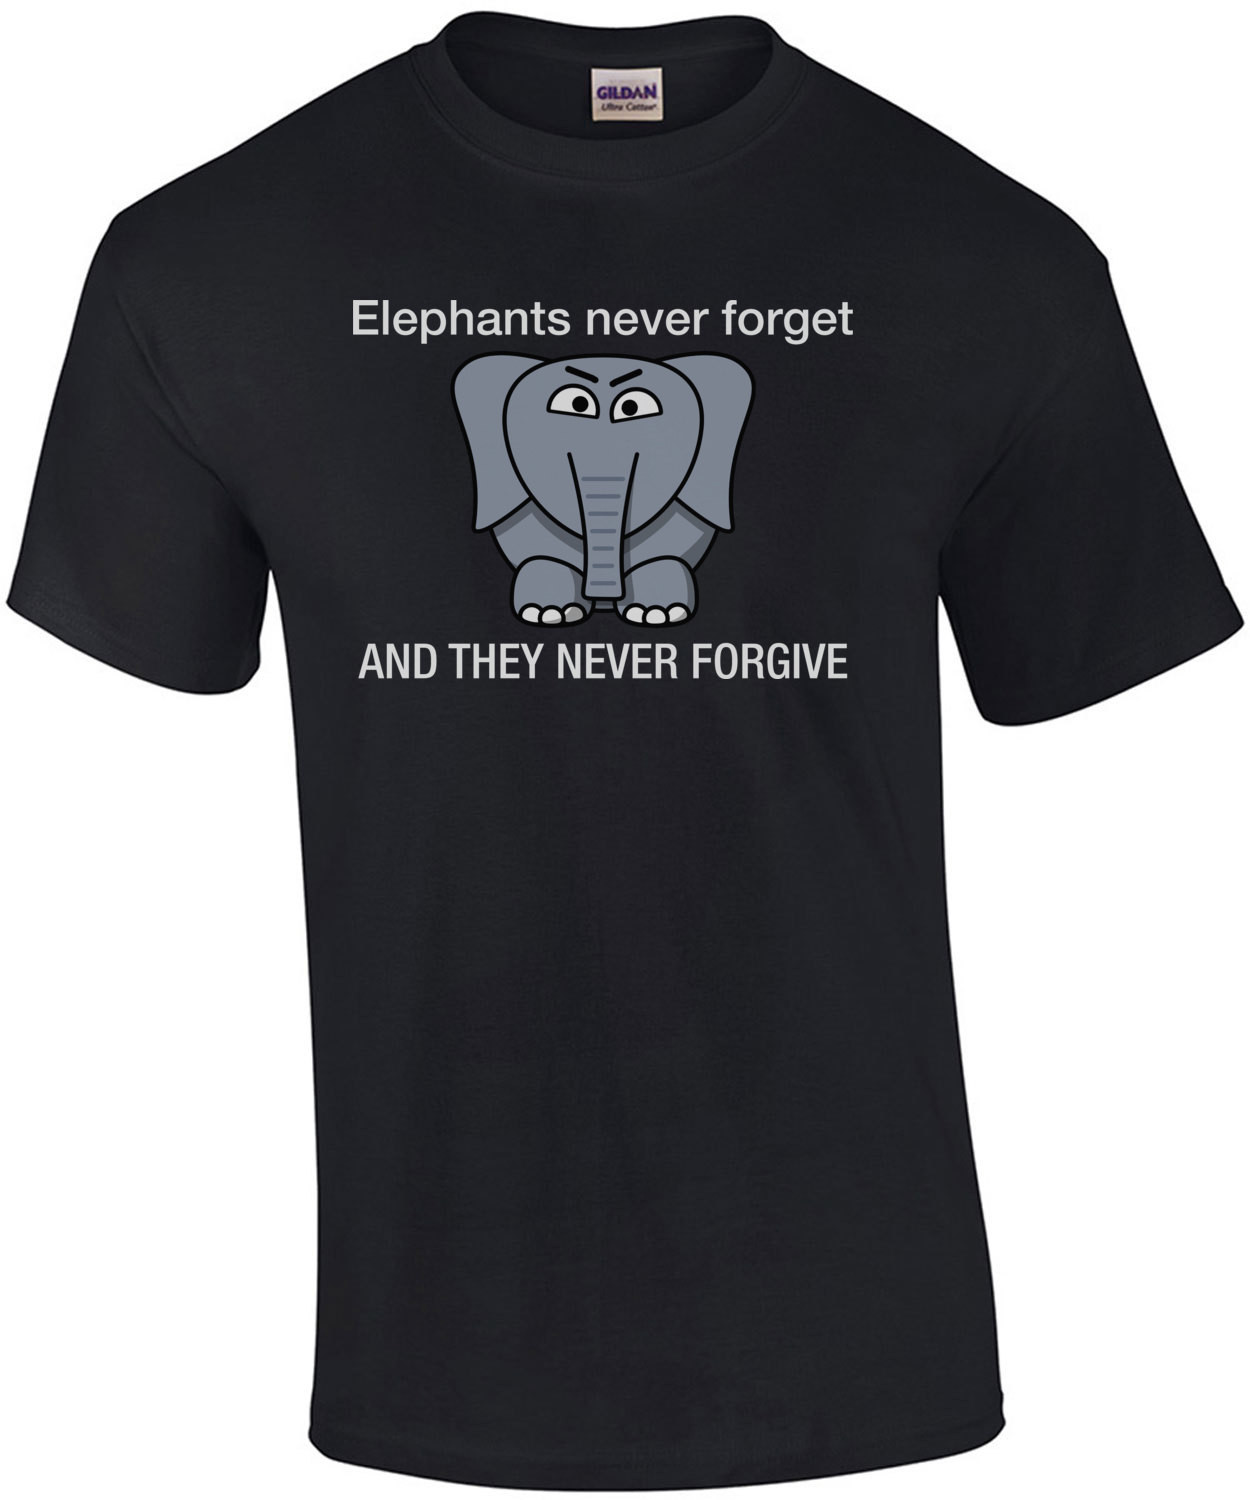 Elephants never forget and they never forgive